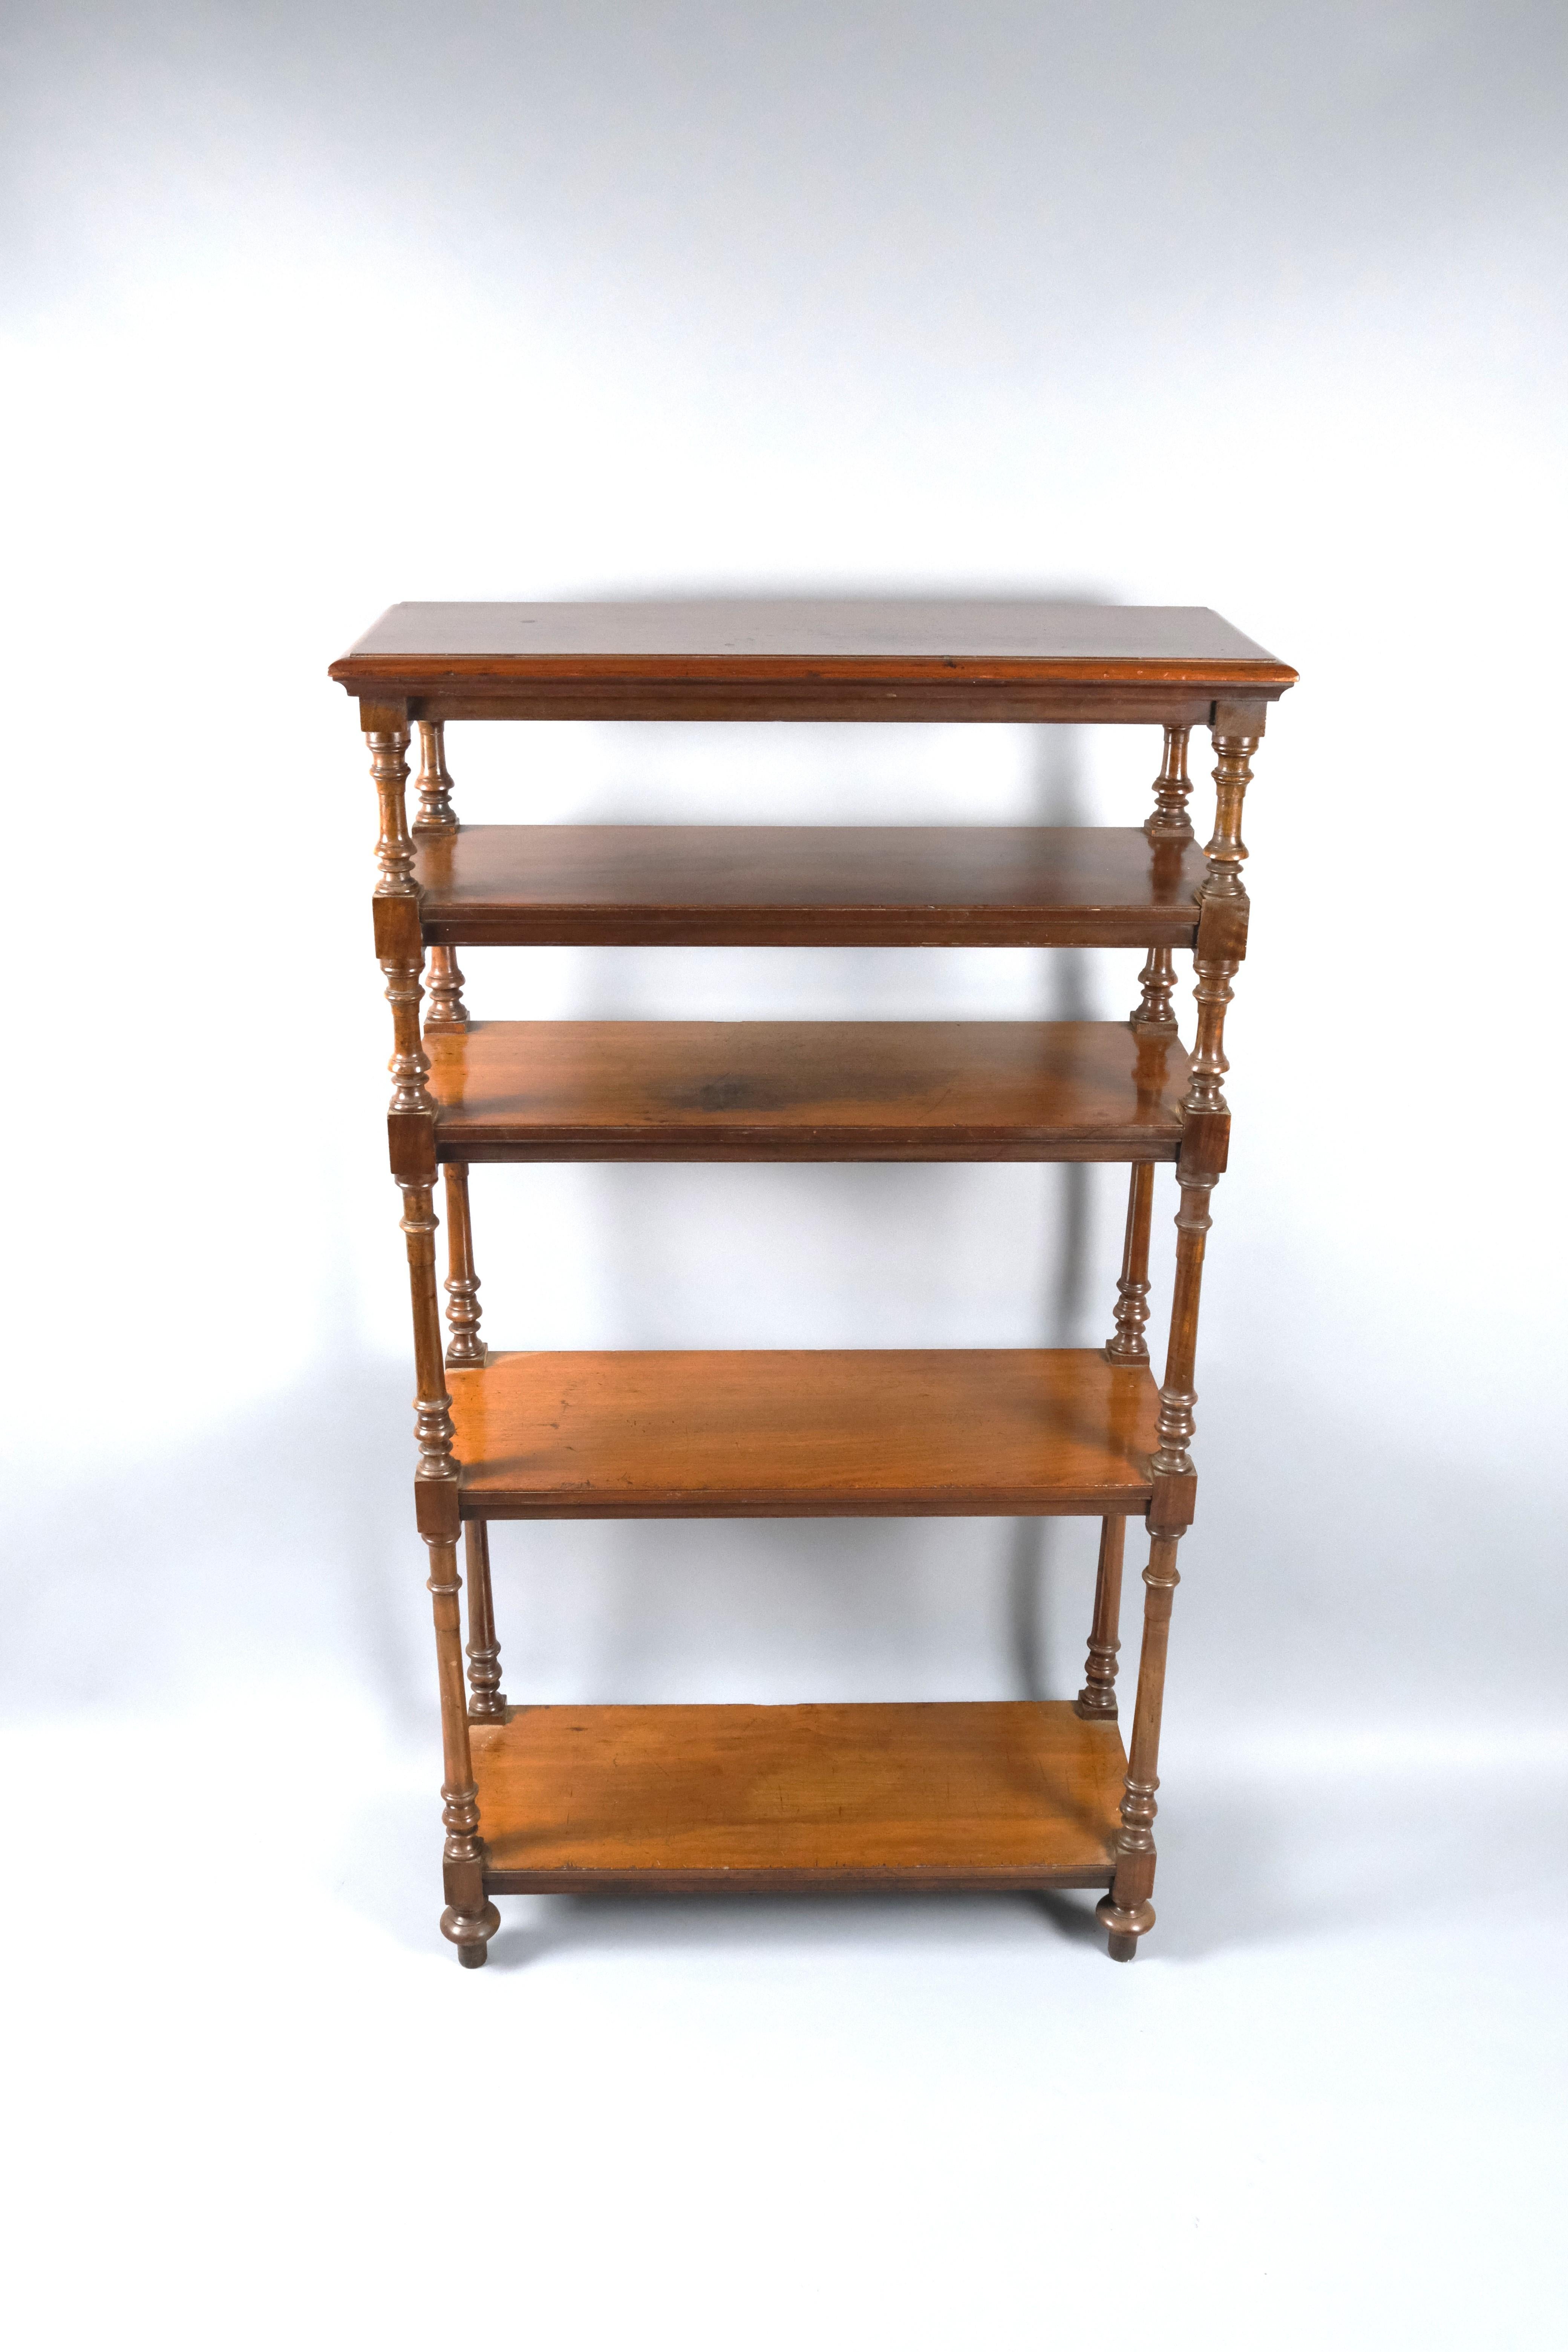 Mid-19th Century Antique Walnut Whatnot/ Shelves For Sale